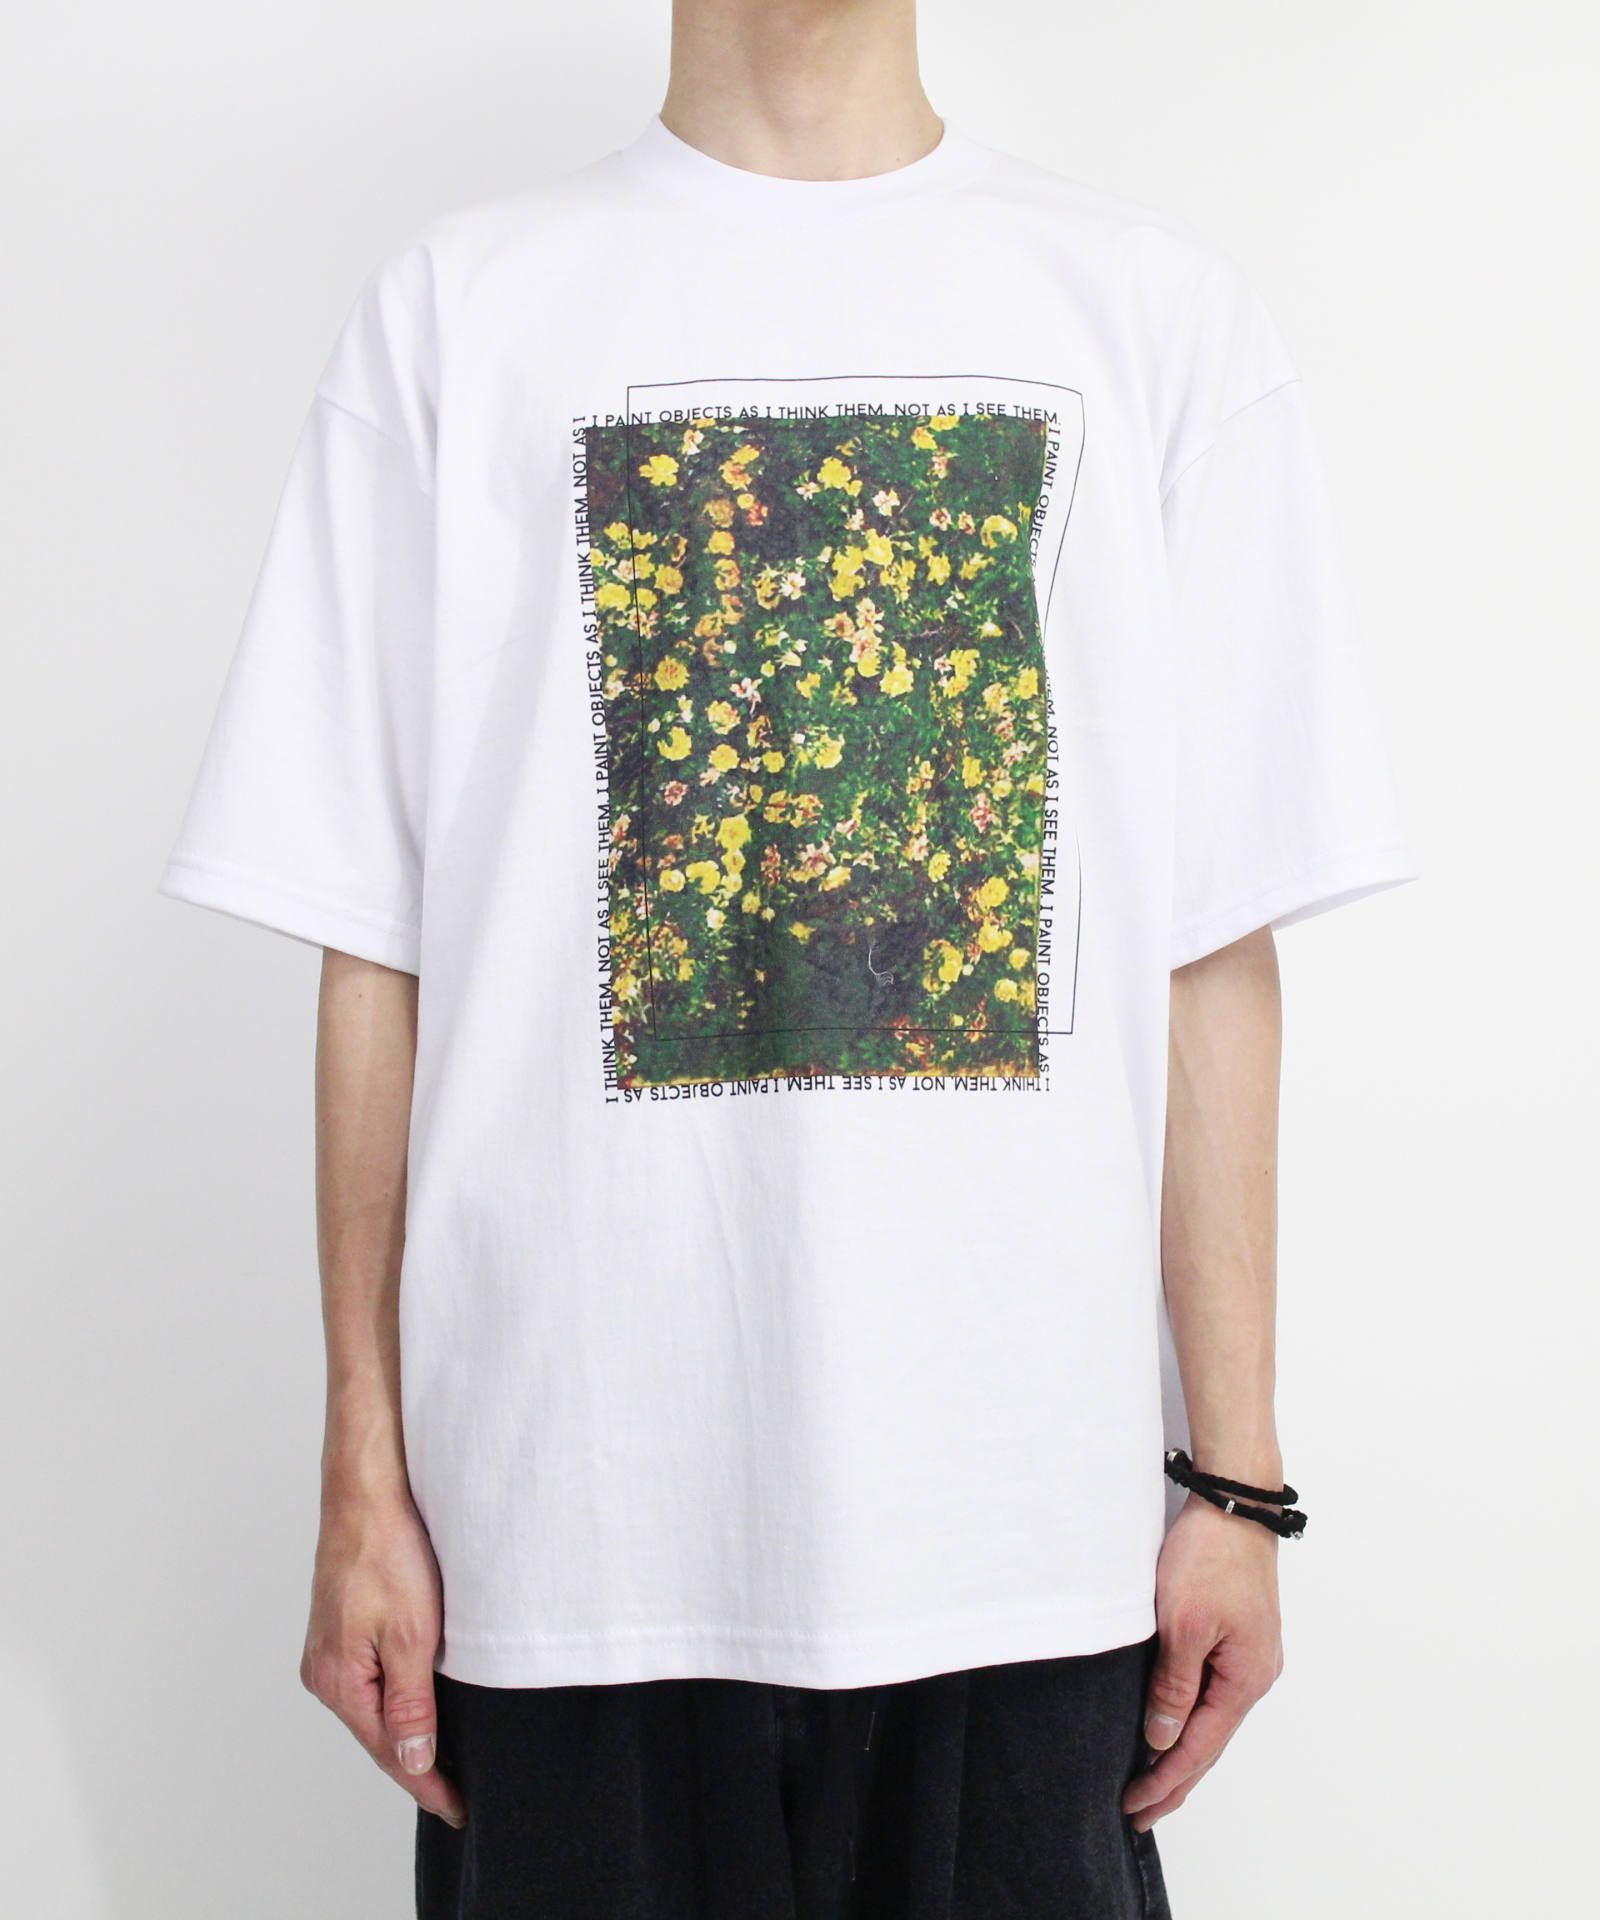 CLANE HOMME - グラフィック プリントTシャツ - GRAPHIC PRINT T/S ...